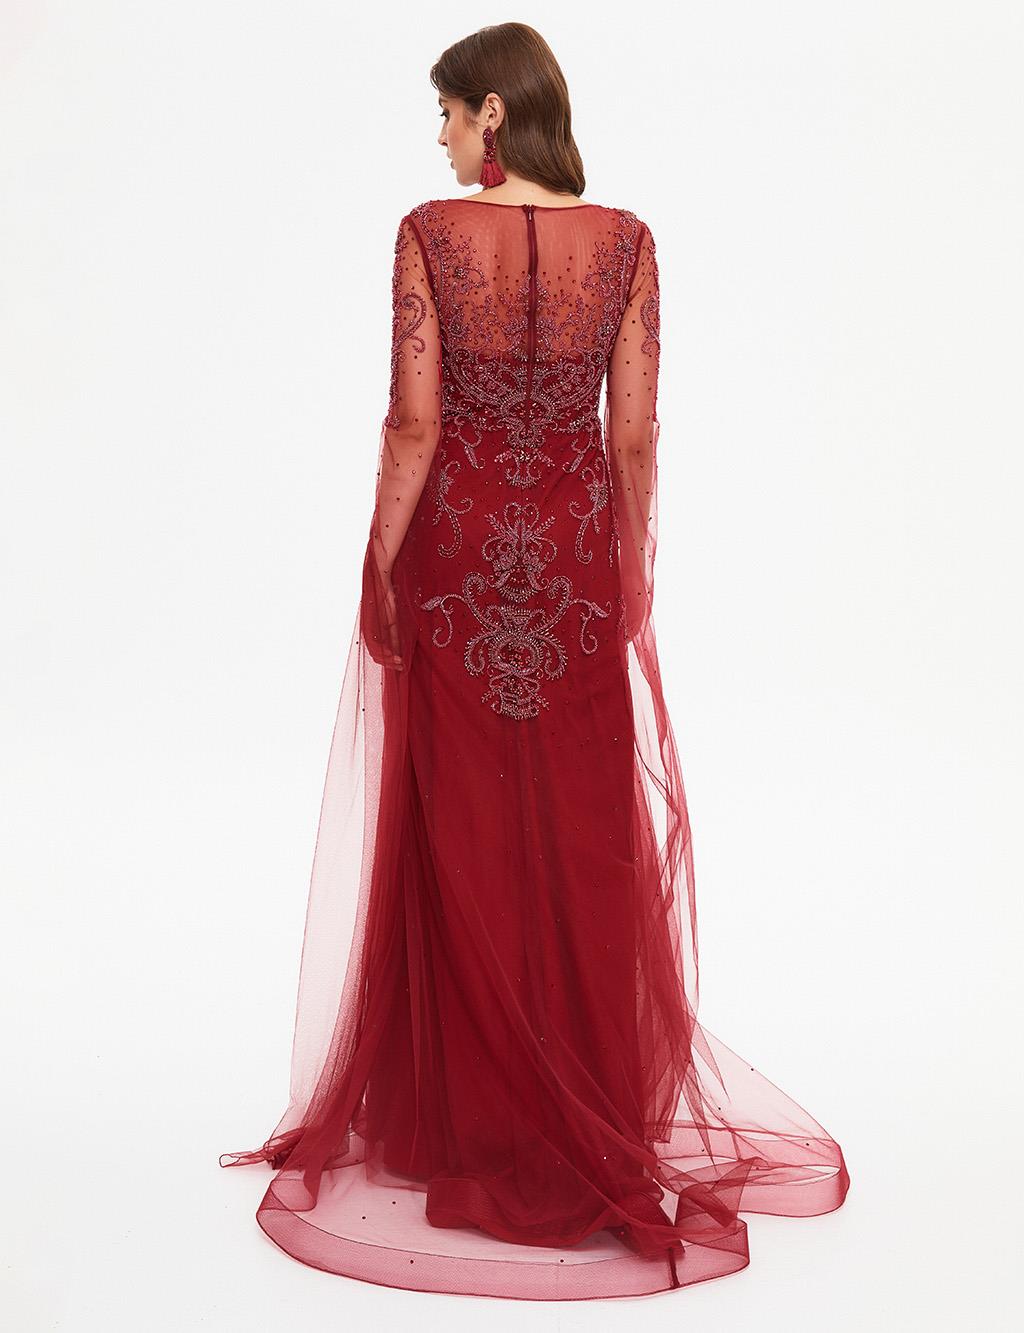 TIARA Tulle Covered Embroidered Evening Dress Burgundy